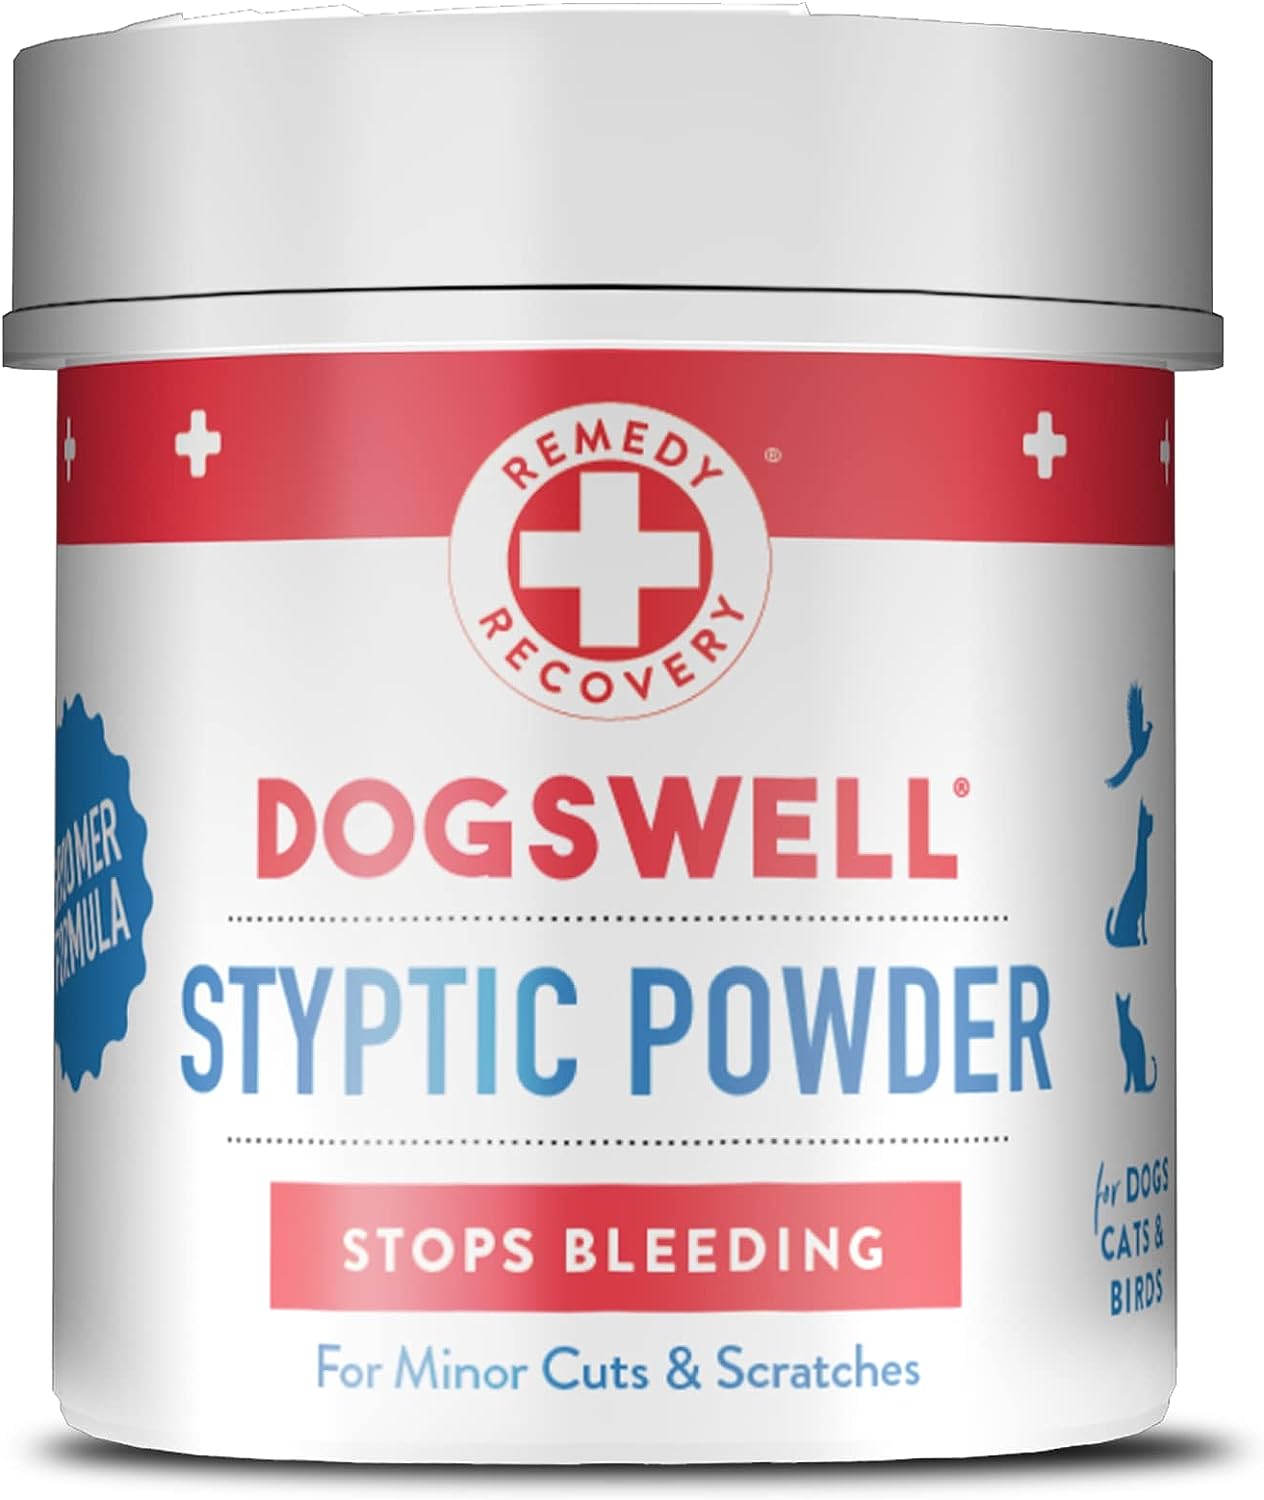 Dogswell Remedy & Recovery Styptic Powder 1.5 oz